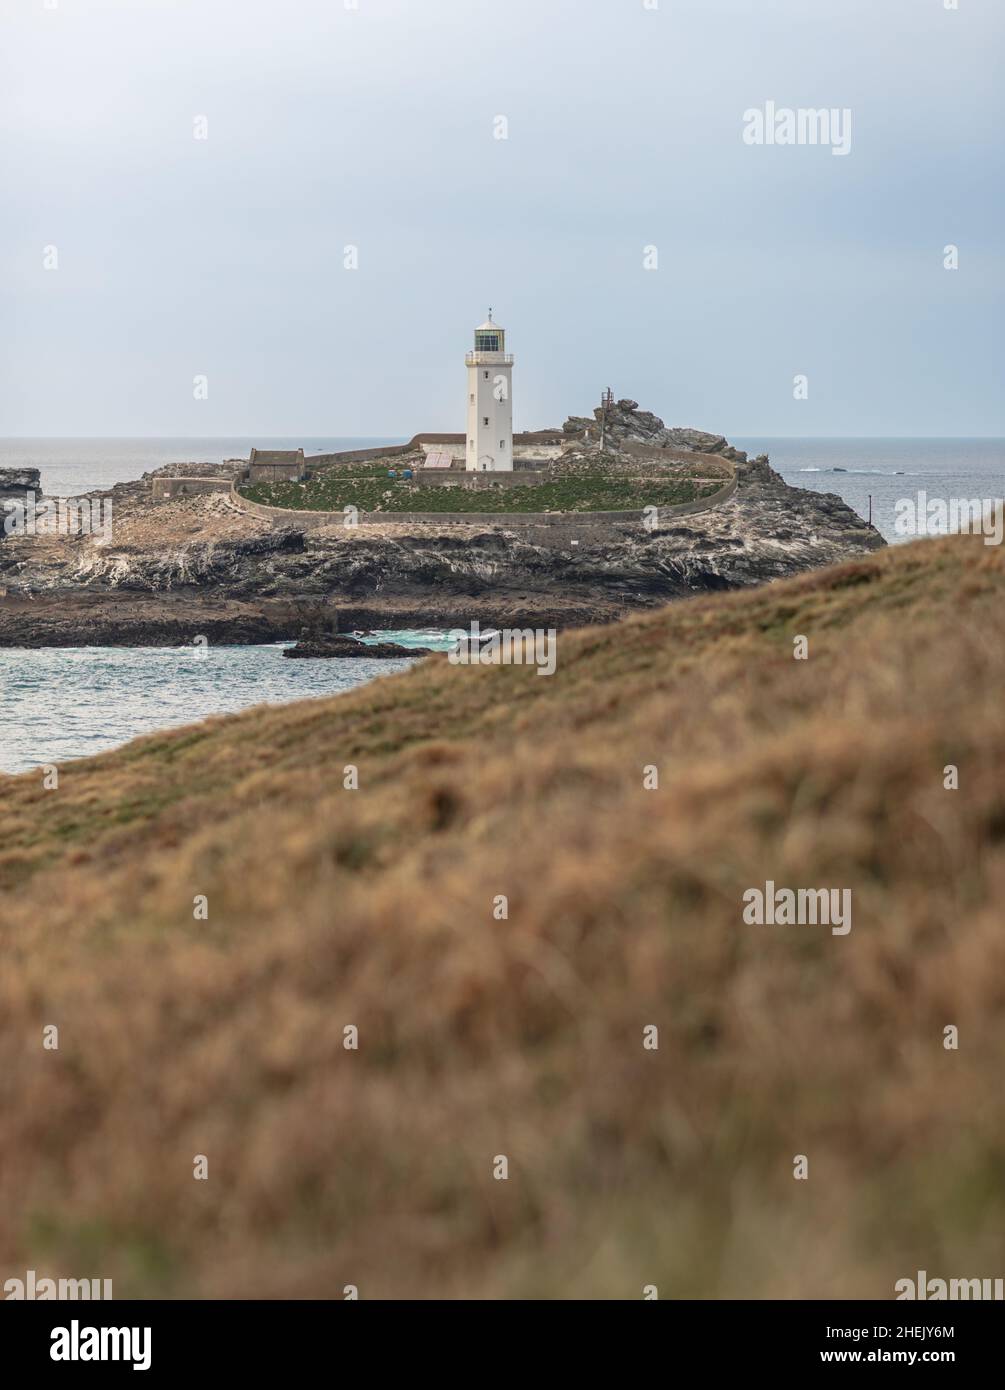 Cornwall, UK - A view of the 'Godrevy Lighthouse' on the southwestern tip of the United Kingdom on Godrevy Island, St Ives Bay on a cold afternoon in Stock Photo